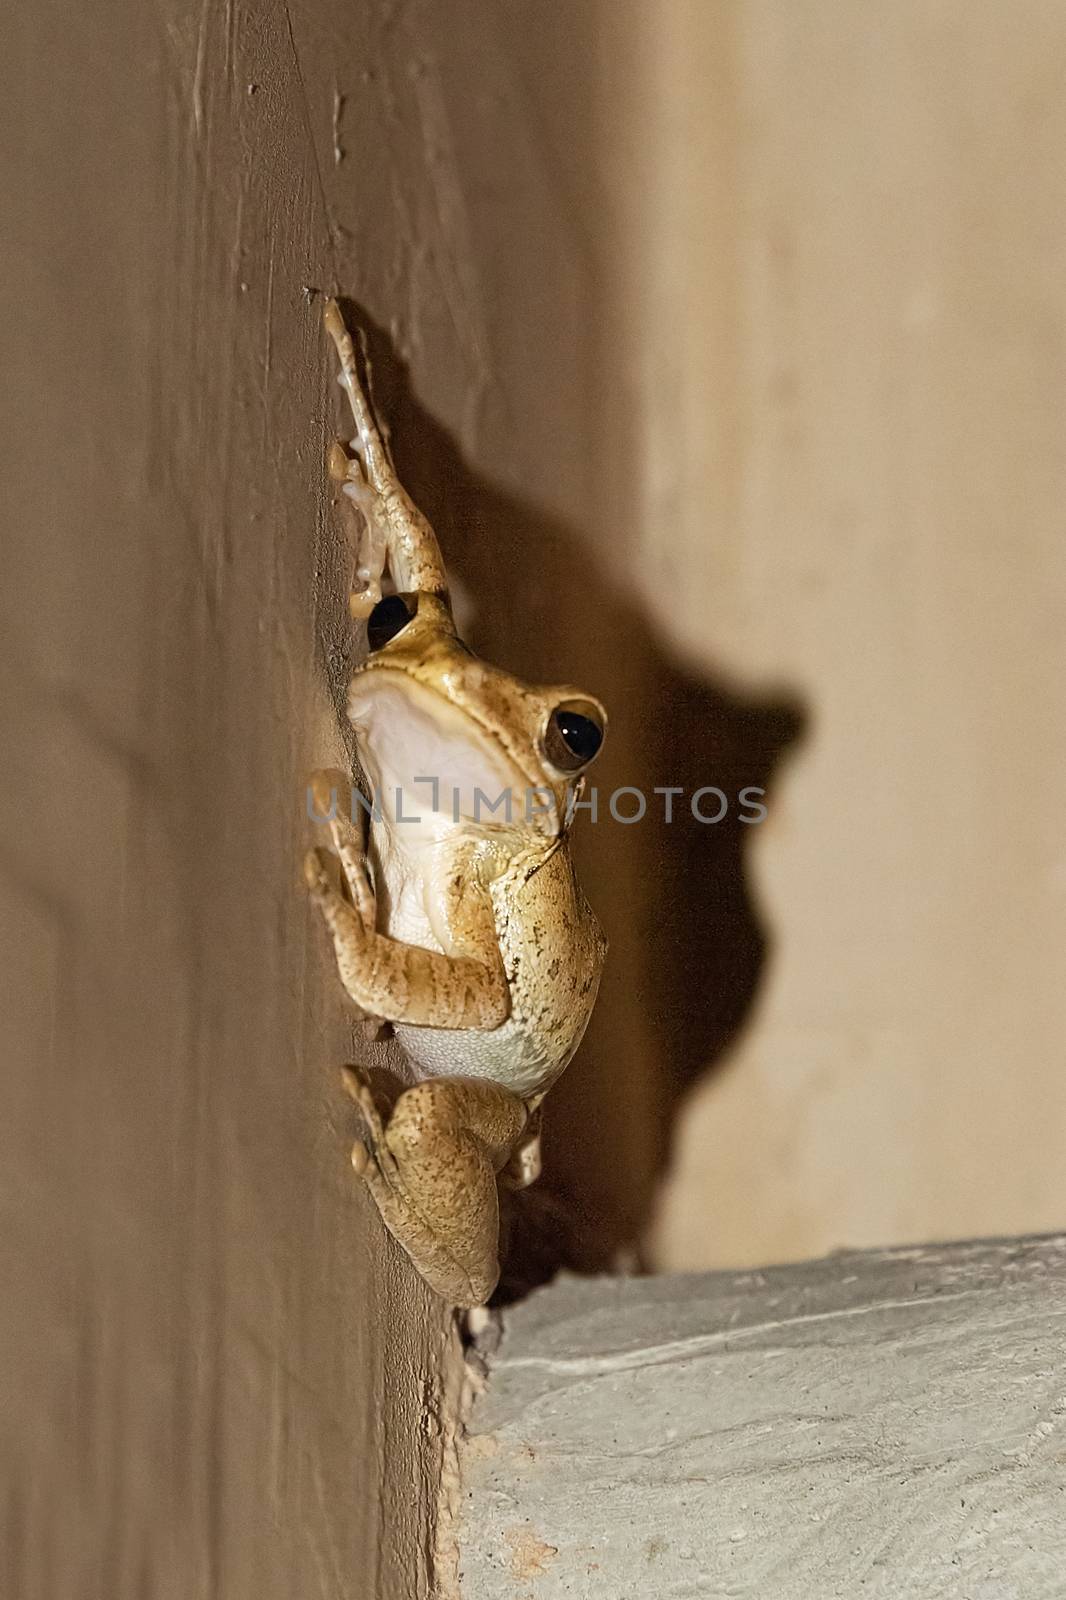 Polypedates cruciger, whipping frog sticks to a wall by mrs_vision